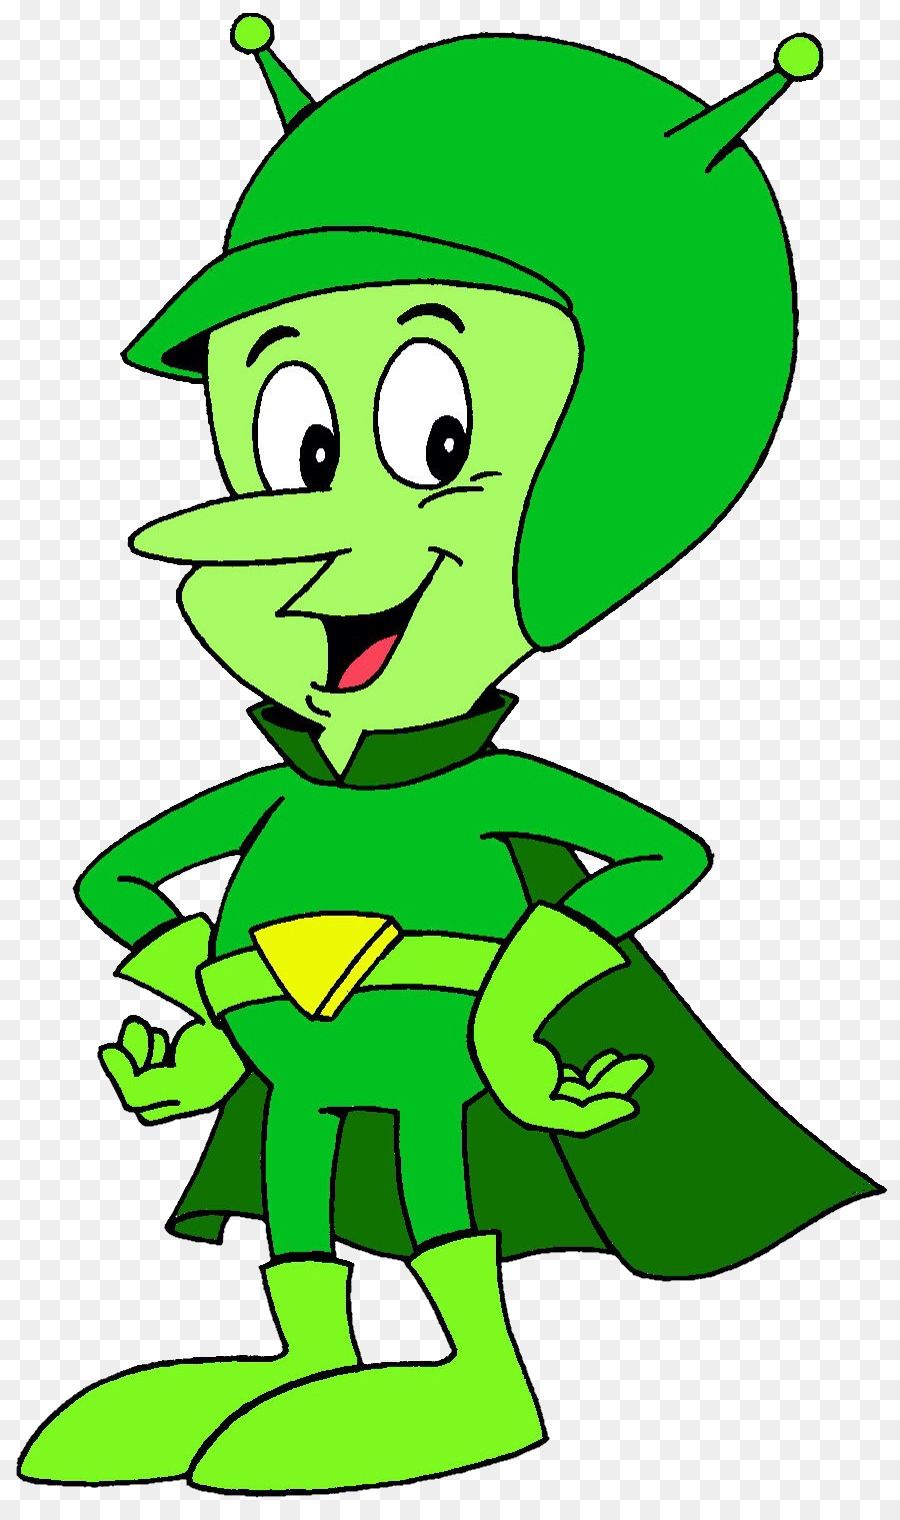 Image result for GREAT GAZOO PICS